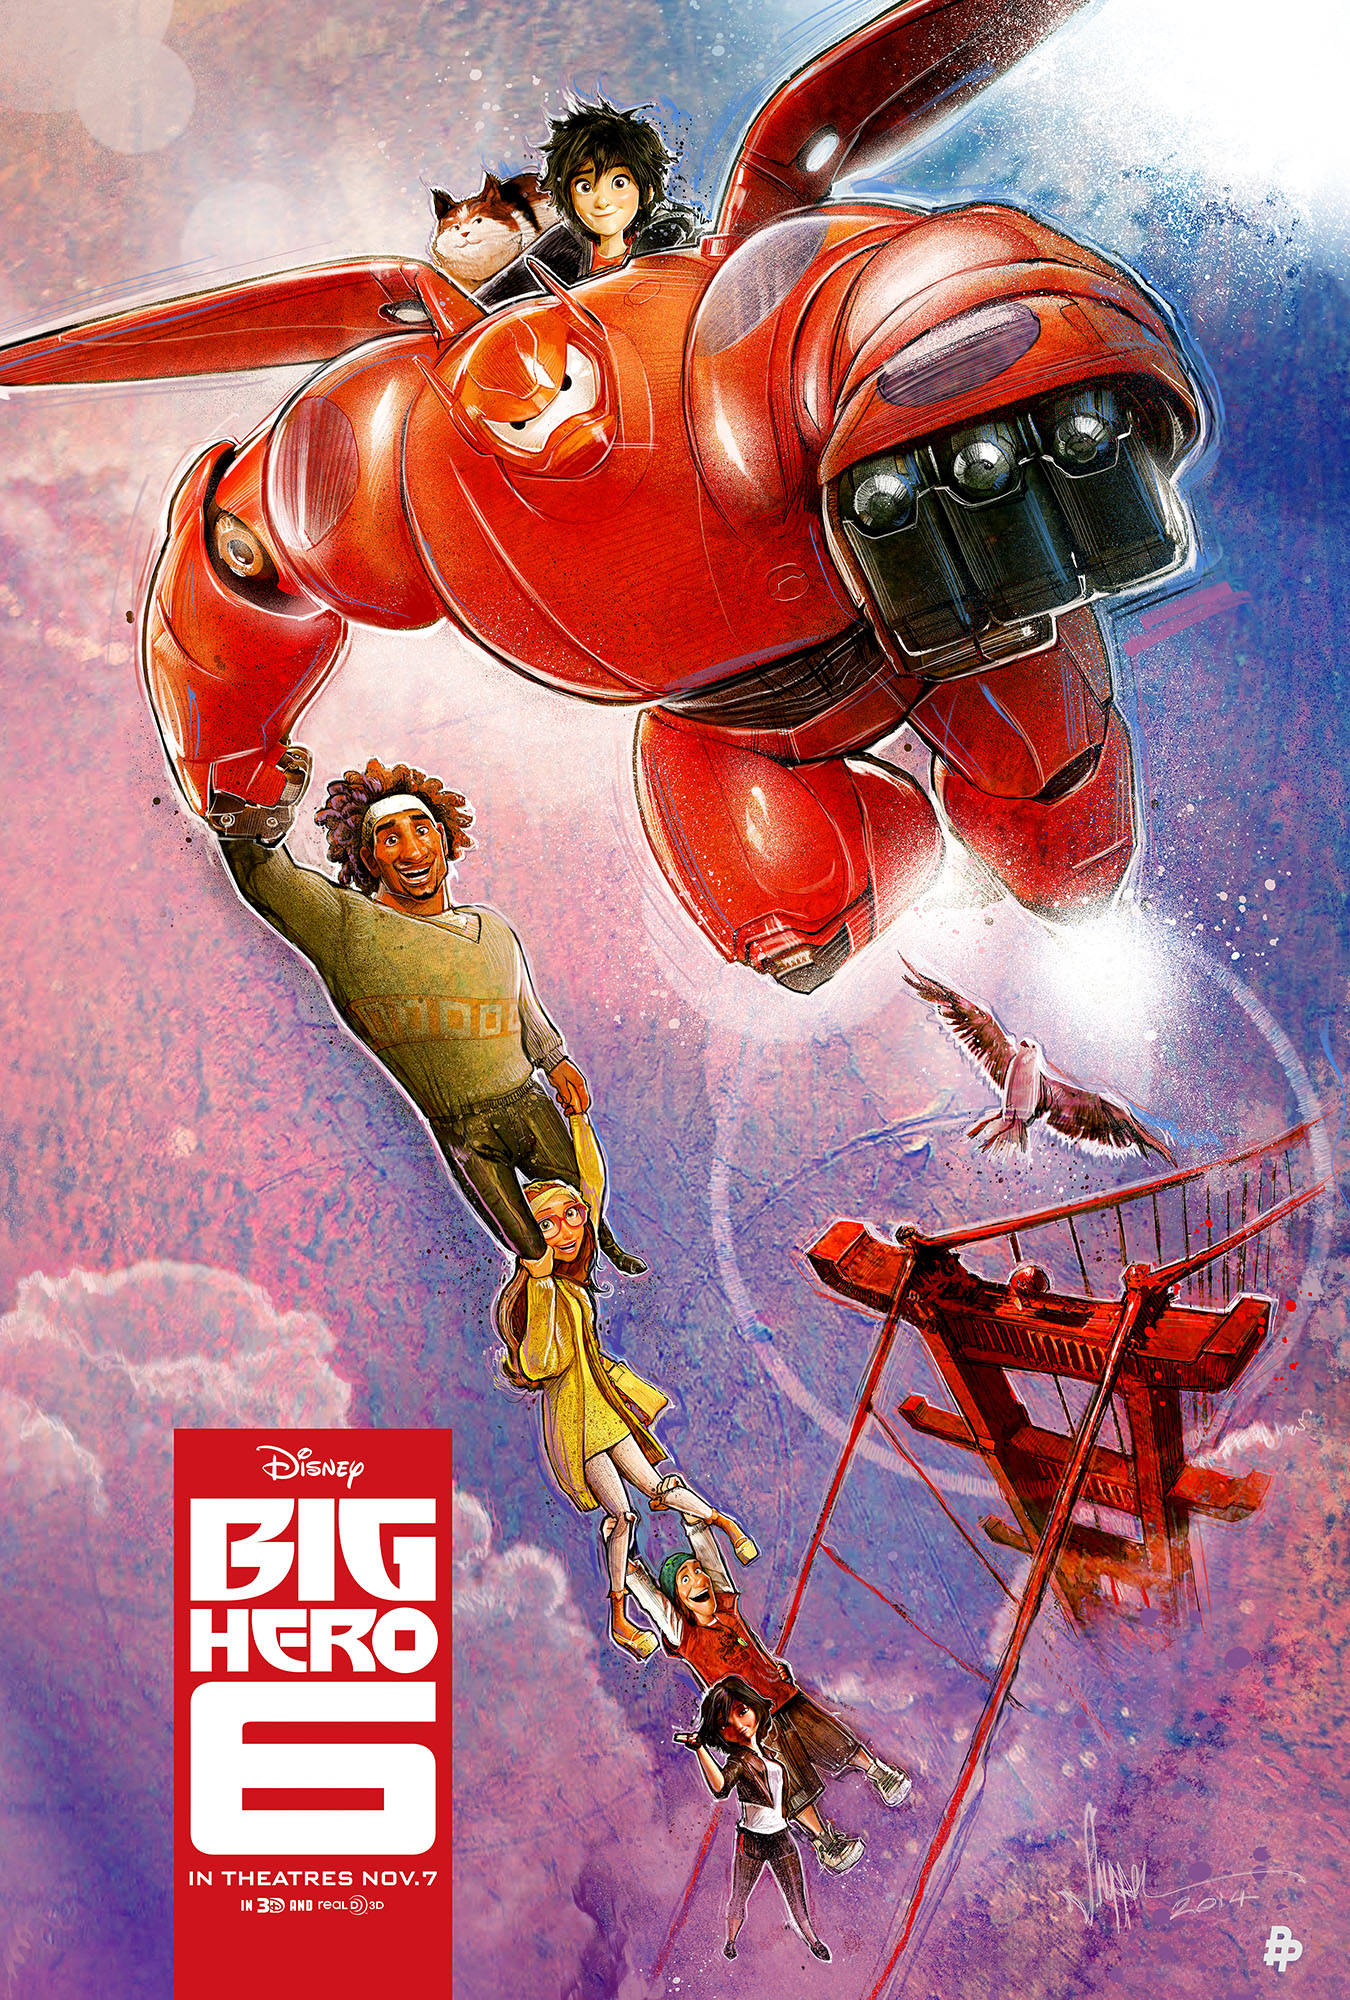 EXCLUSIVE! The Poster Posse Rolls Out Phase 2 For Disney’s “Big Hero 6